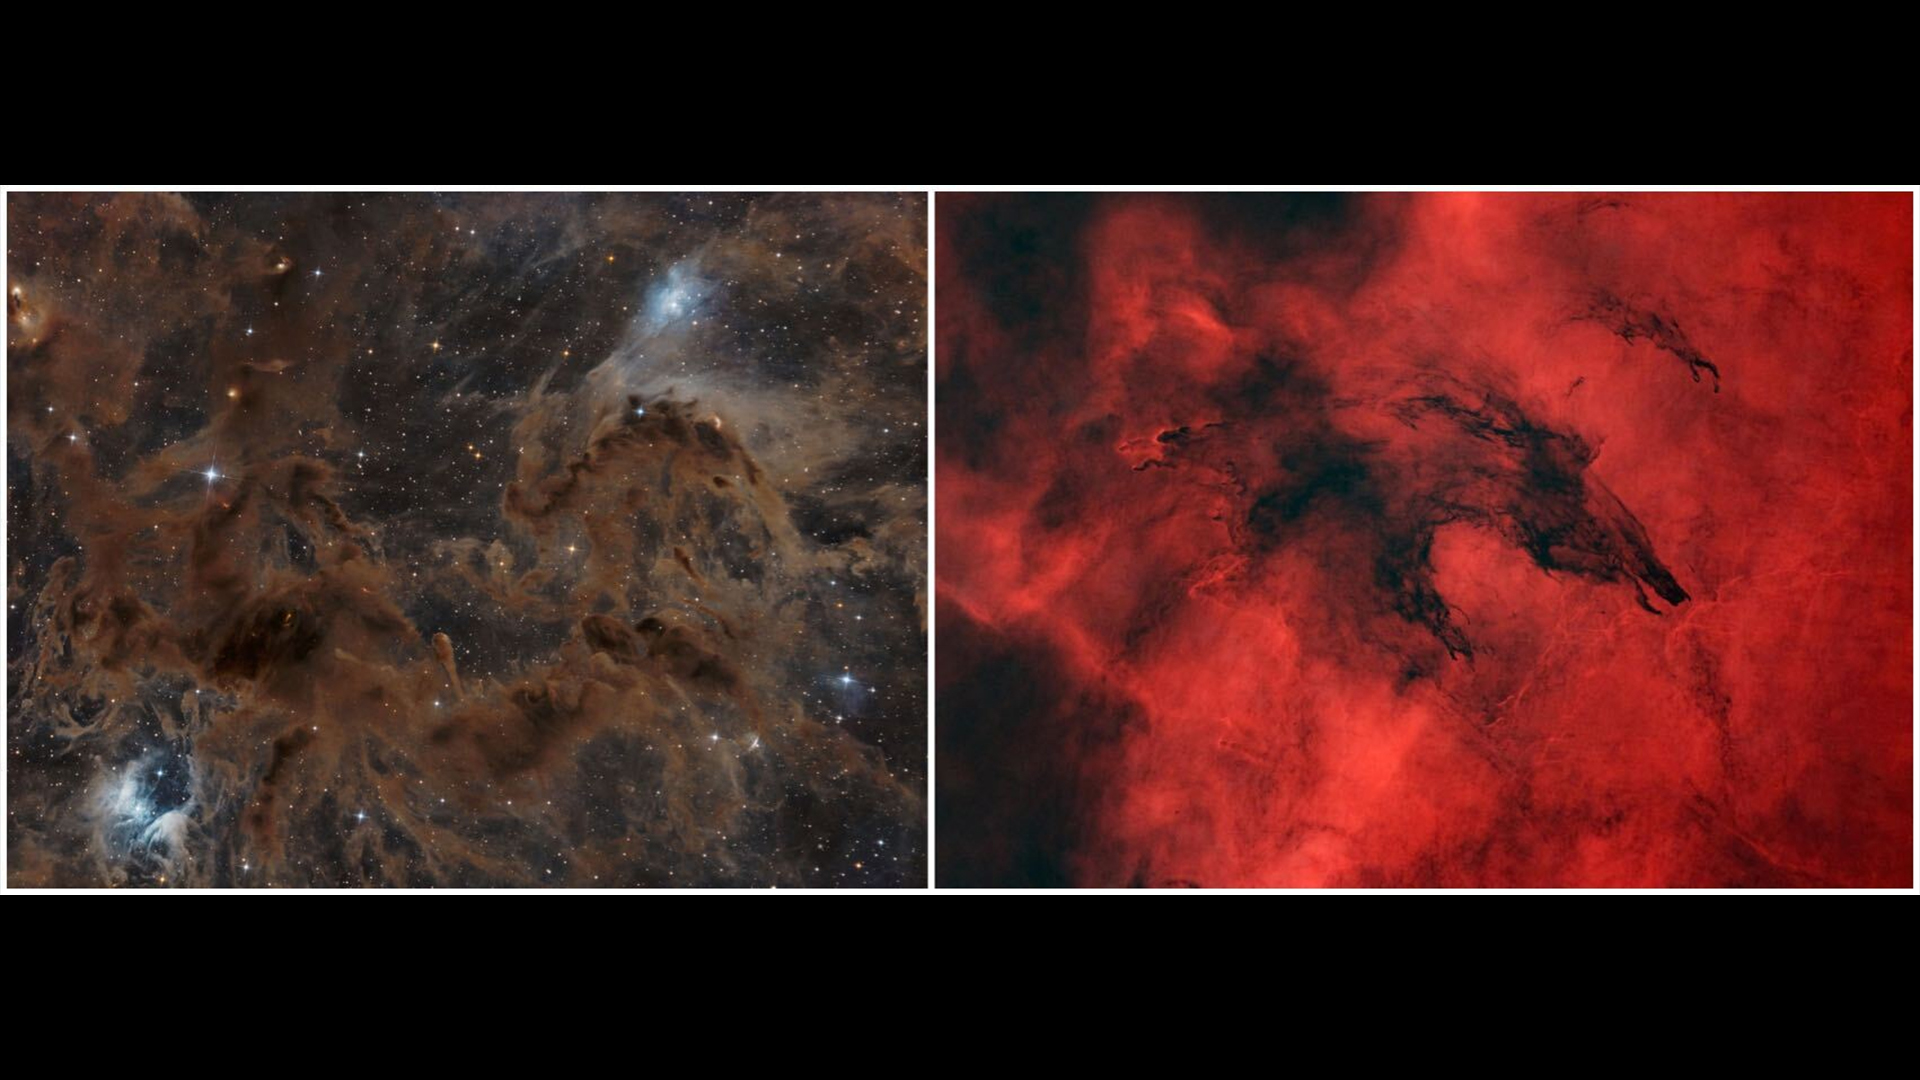 Photograph of a nebula with brown hues; Photograph of a nebula with red hues